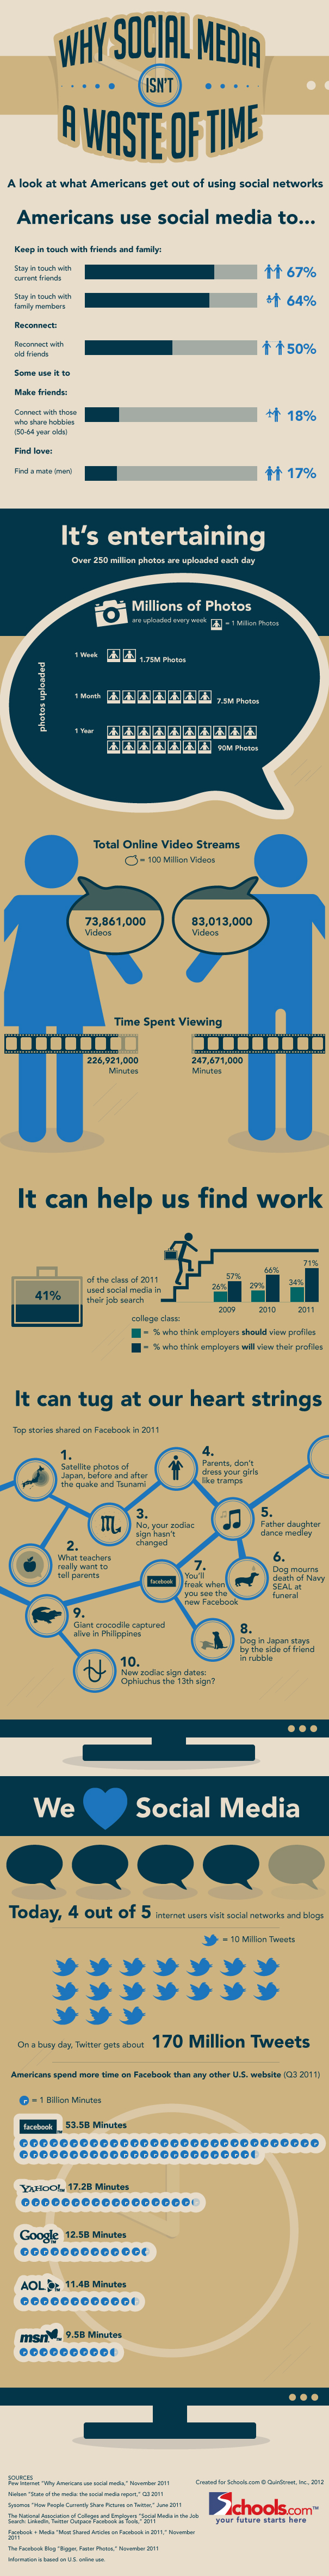 Social Media Is A Waste of Time Infographic